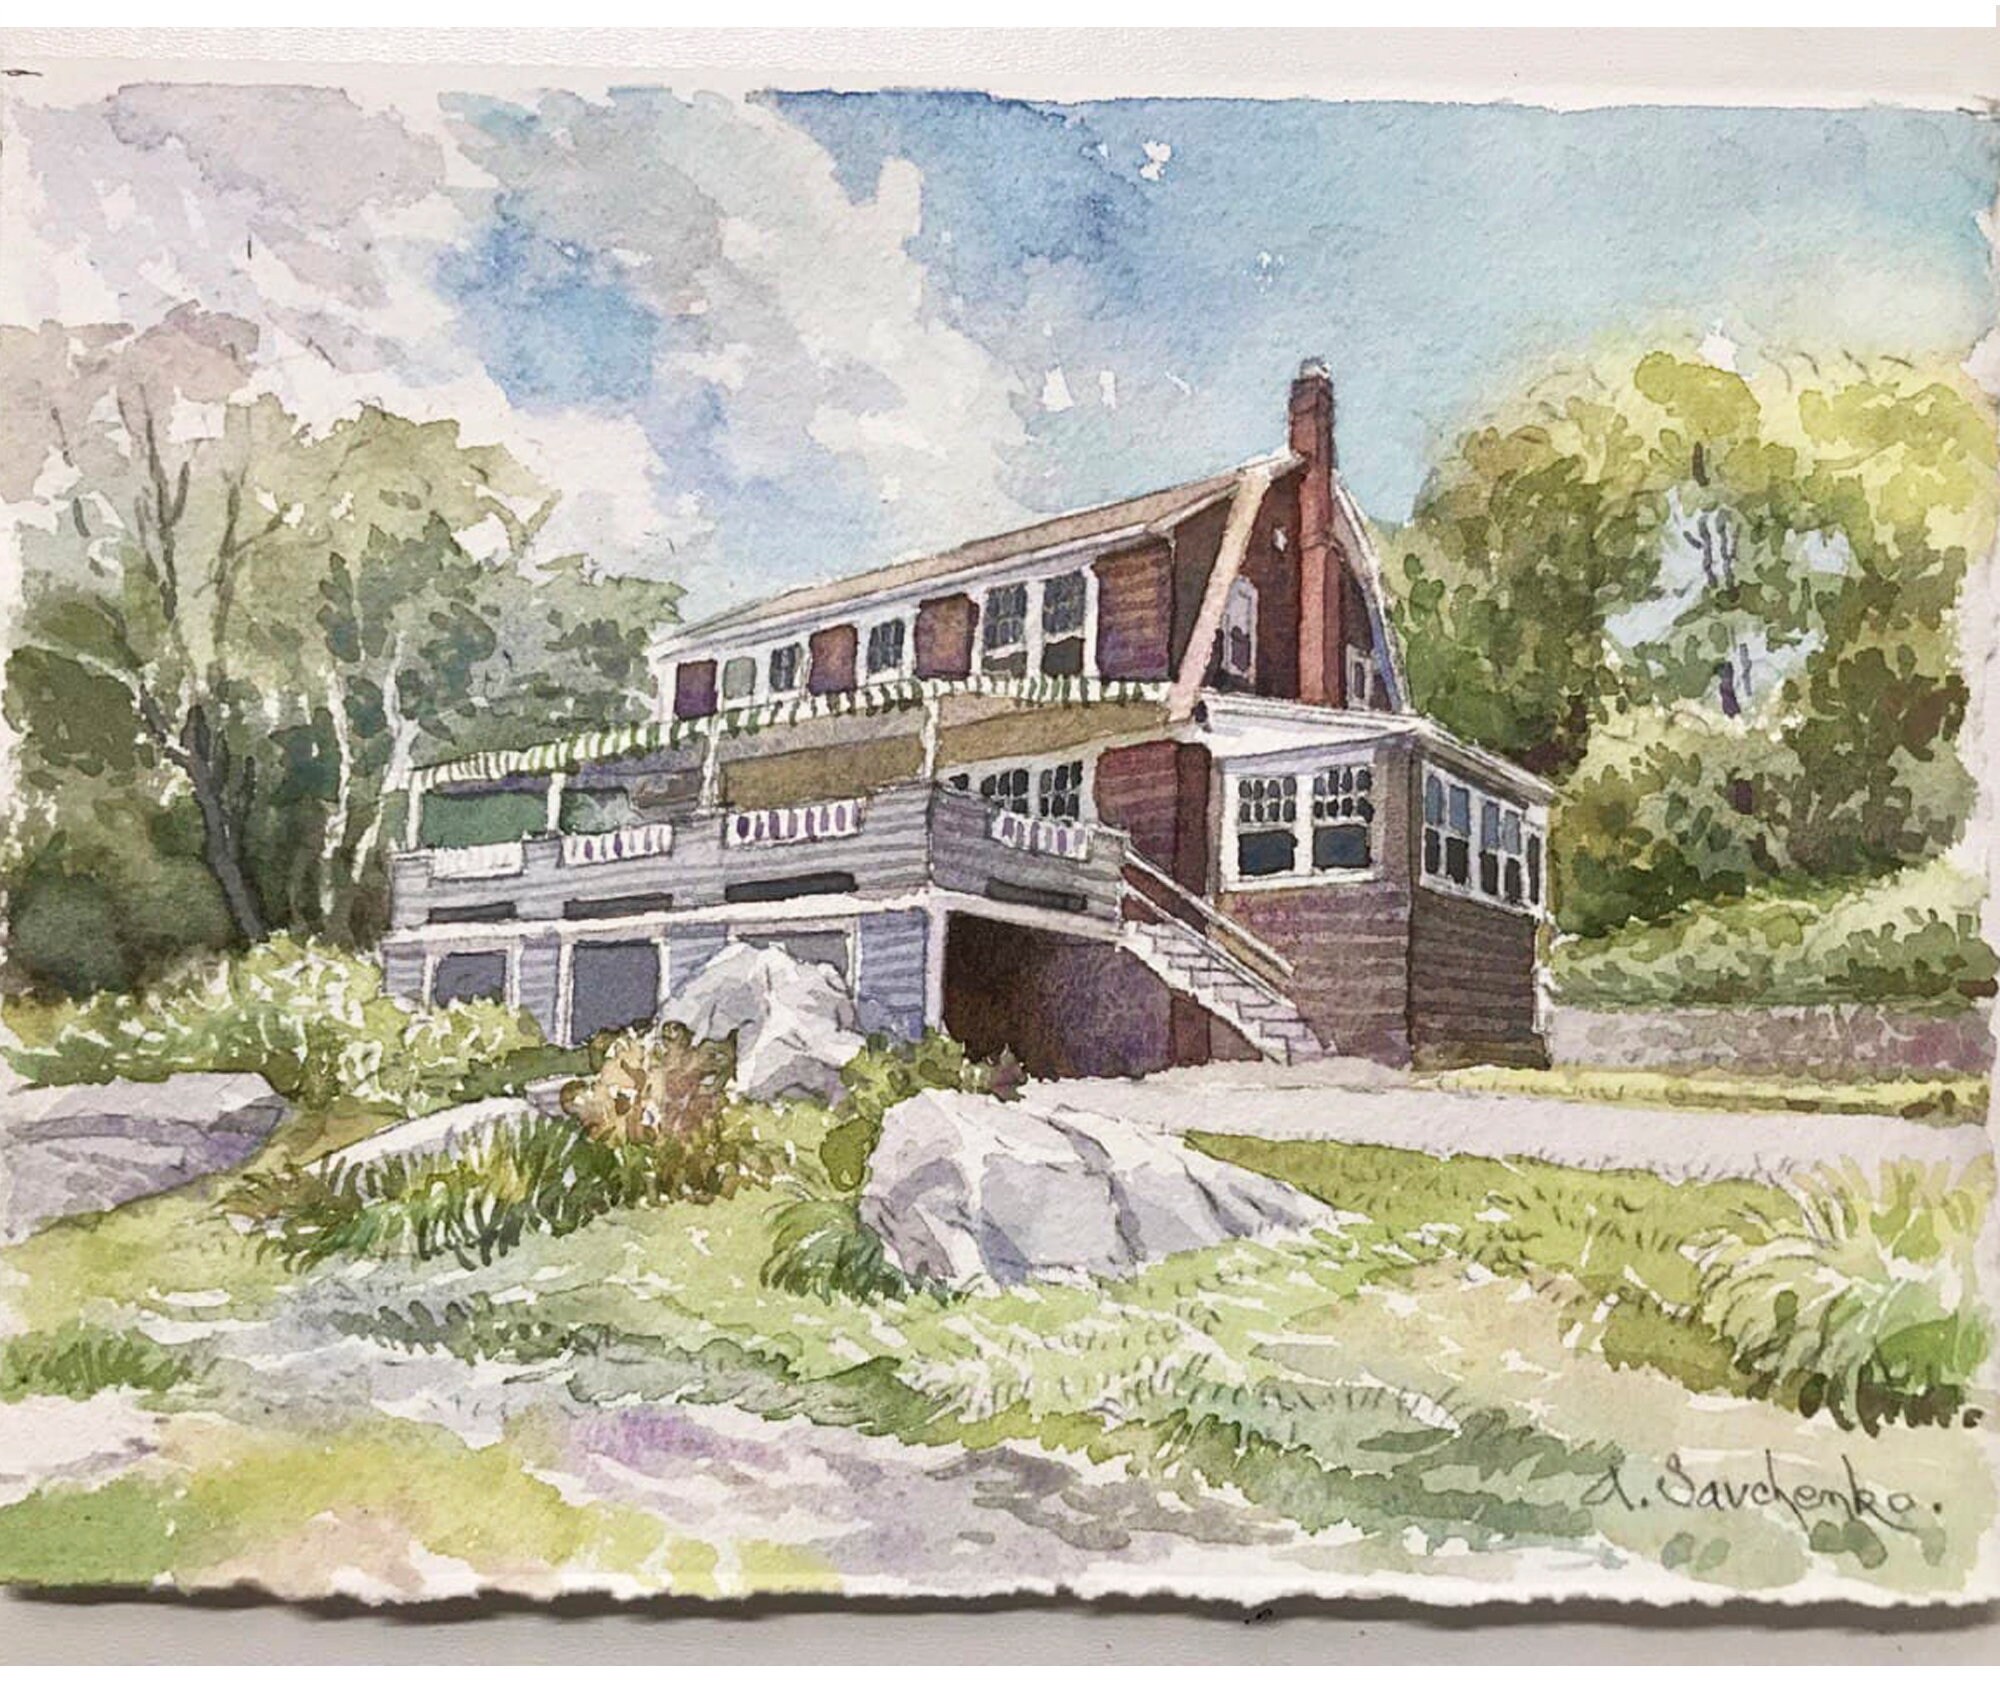 Watercolor Paintings of homes, businesses, pets